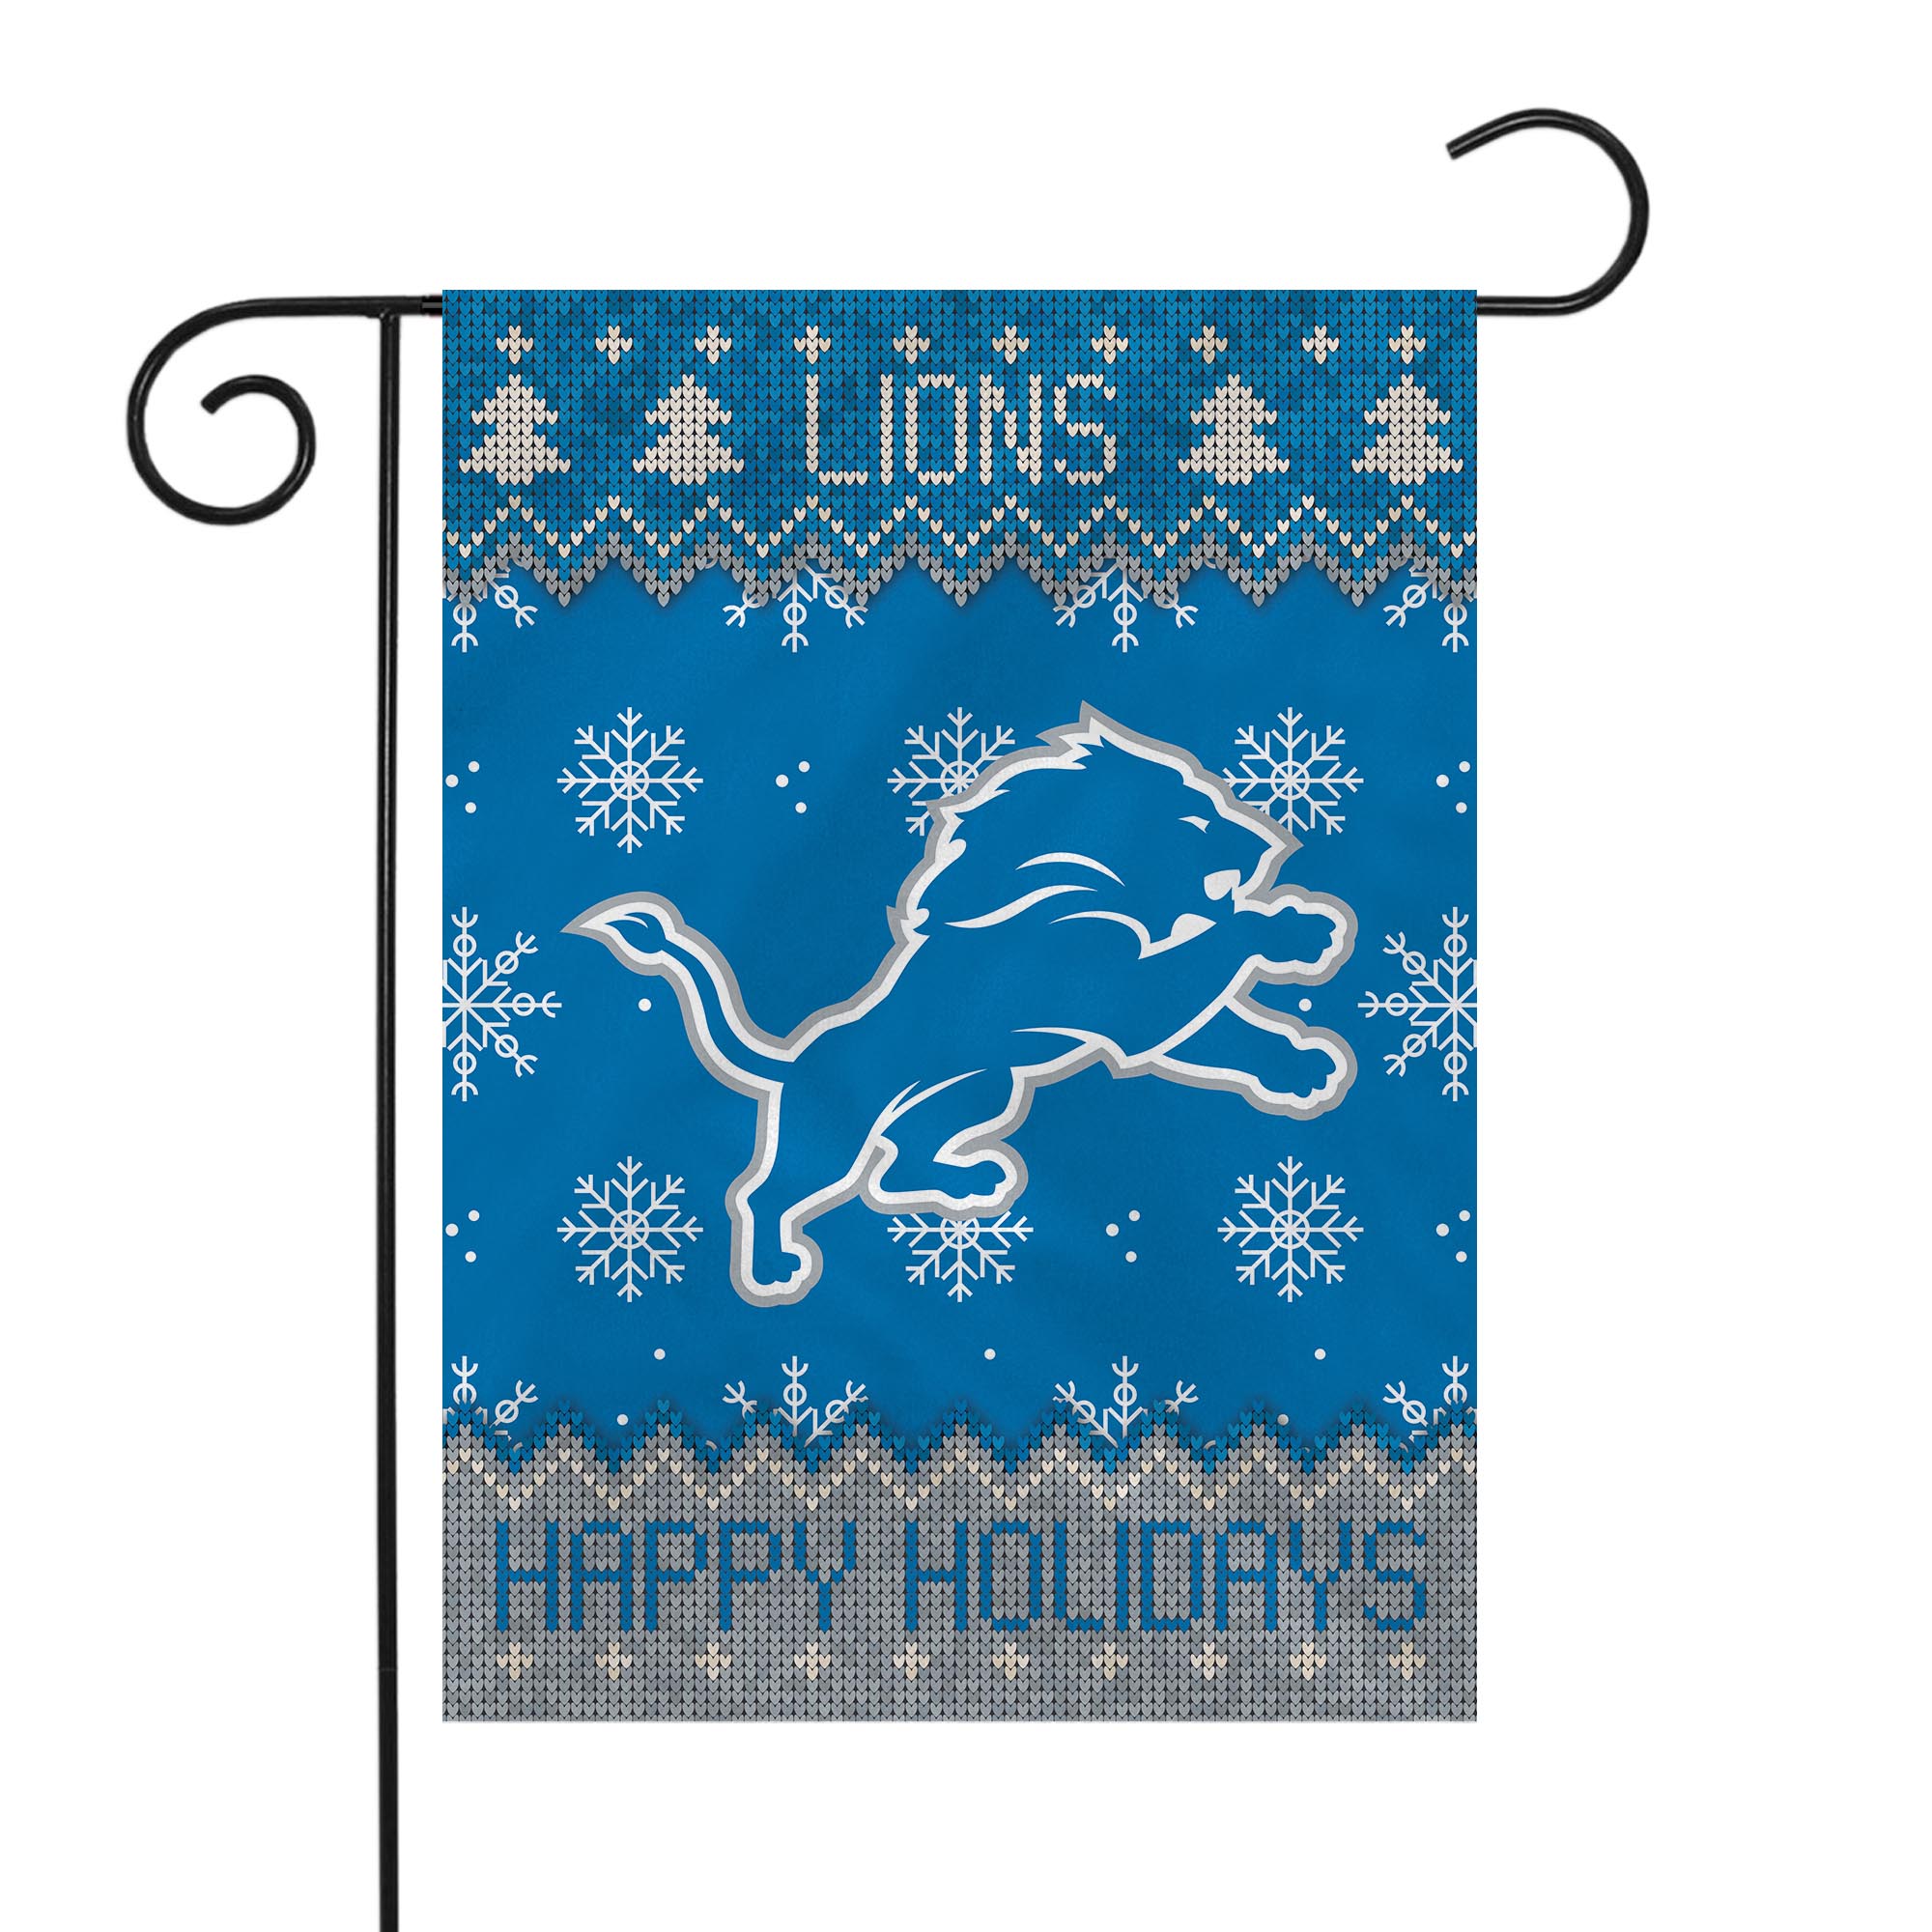 Rico Industries NFL Football Detroit Lions Winter/Snowflake Double Sided Garden Flag